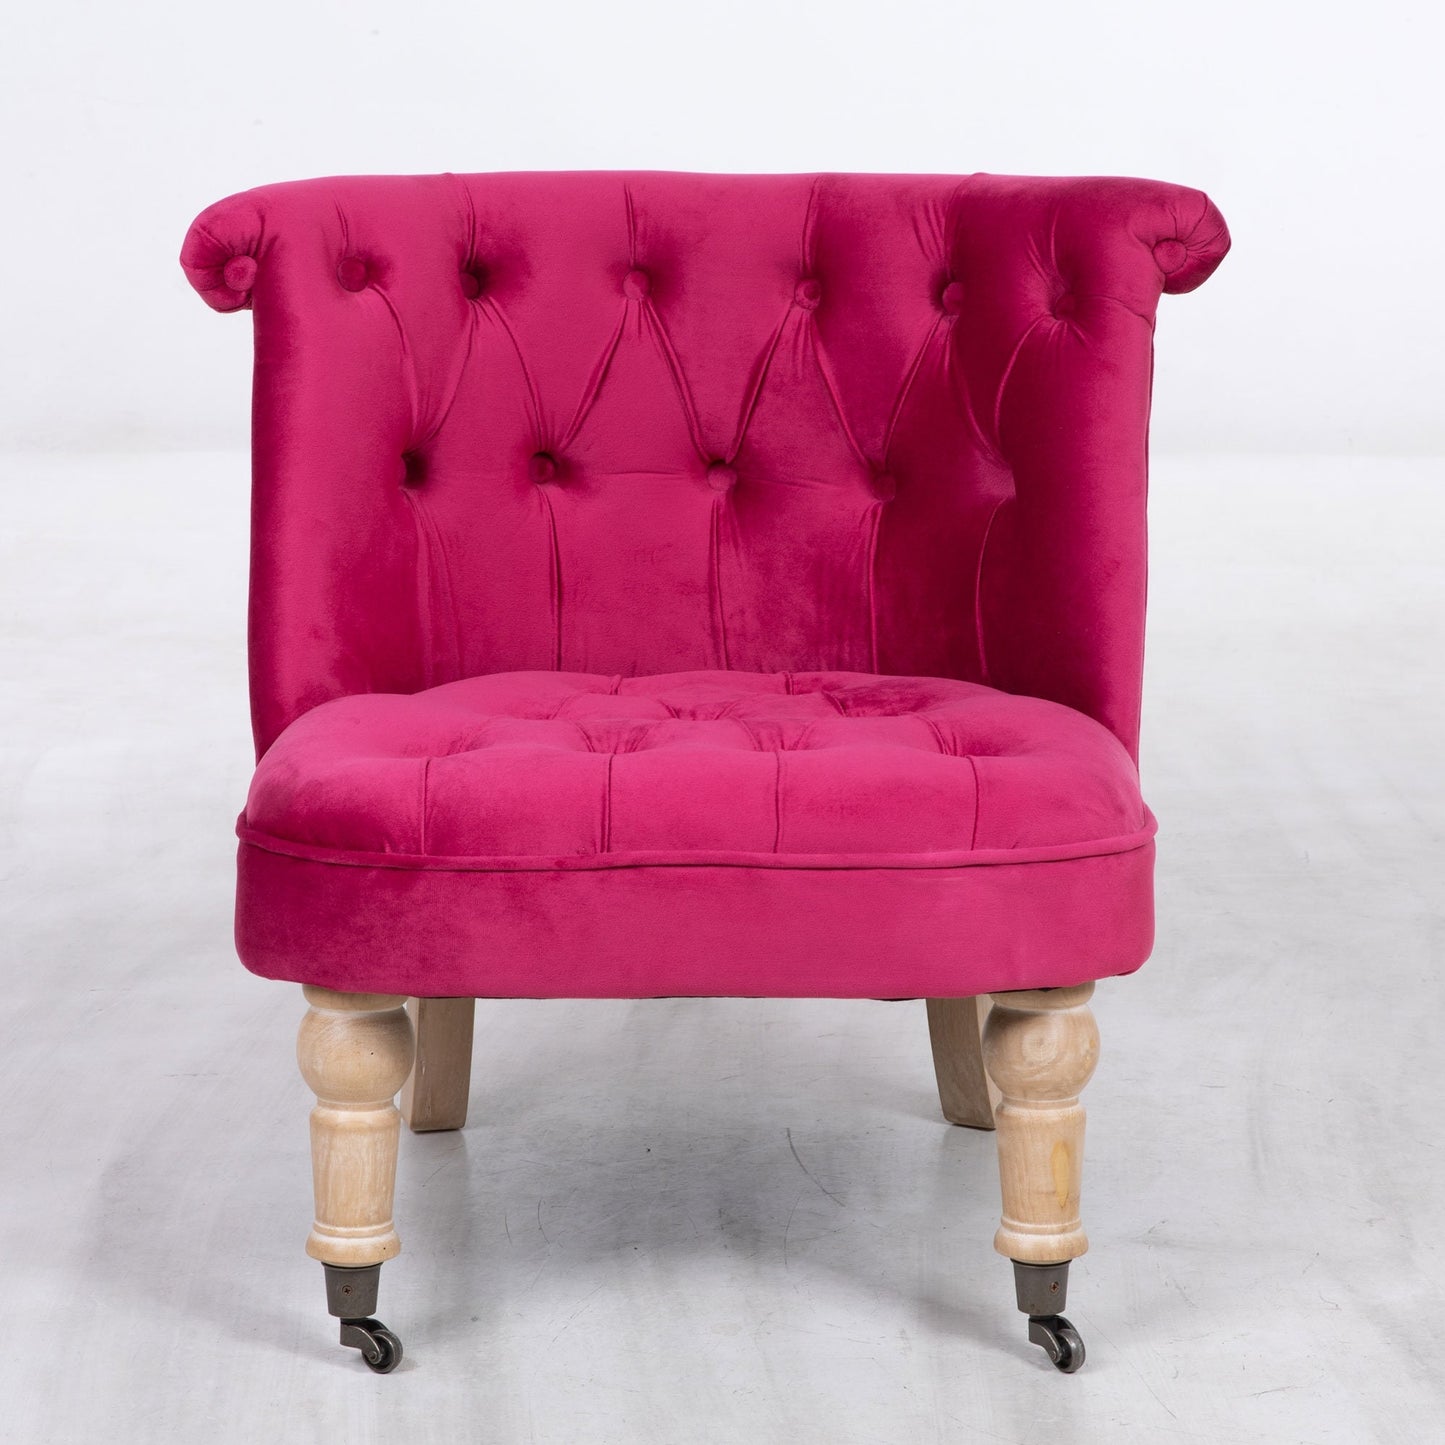 Raspberry Pink Cocktail Chair With Oak Legs